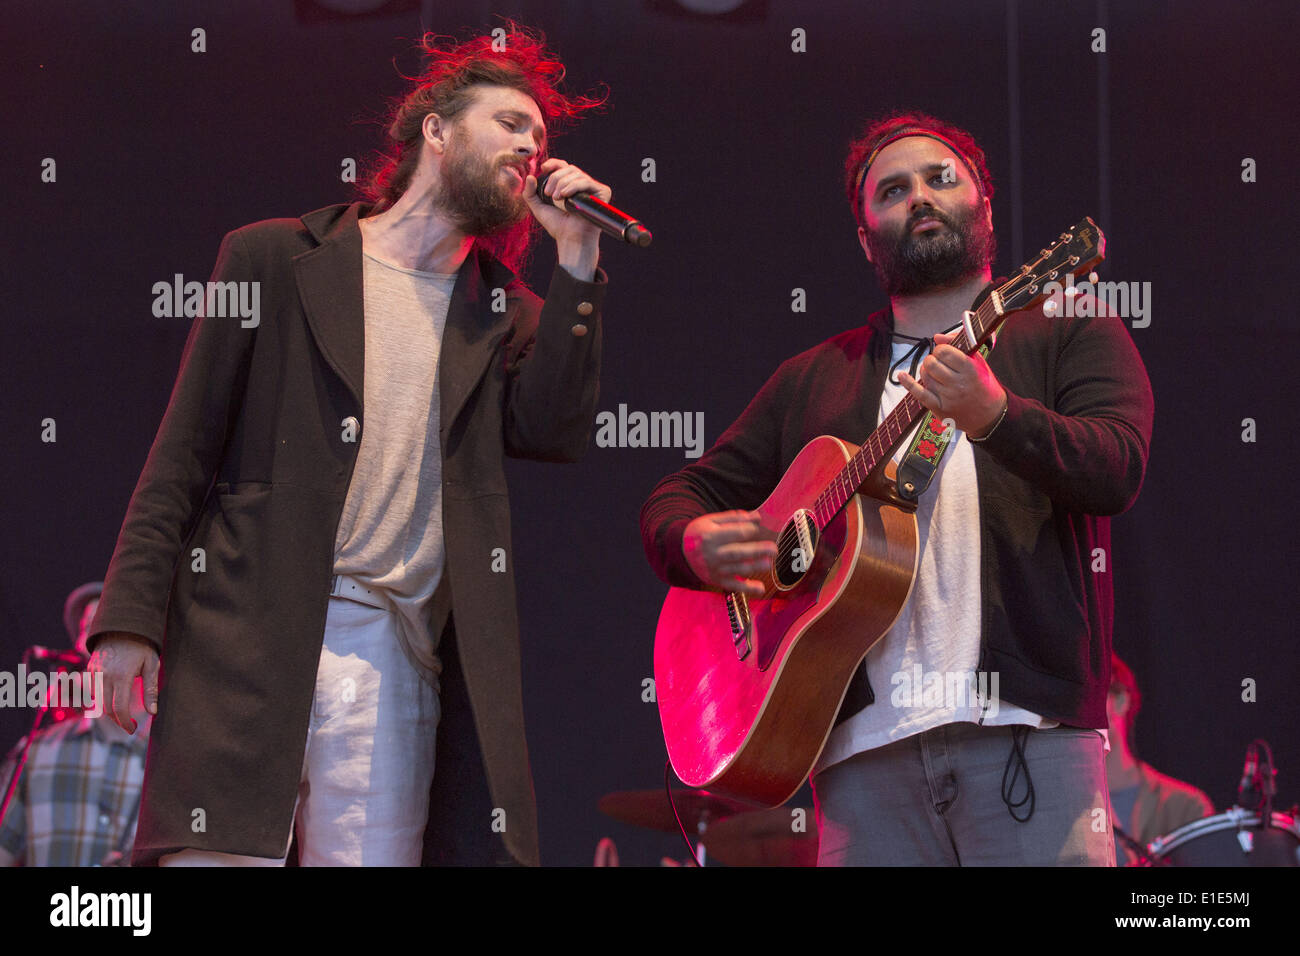 Chicago, Illinois, USA. 31st May, 2014. NICO AGLIETTI (R) and ALEX EBERT perform with Edward Sharpe and the Magnetic Zeros at the FirstMerit Bank Pavilion at Northerly Island in Chicago, Illinois © Daniel DeSlover/ZUMAPRESS.com/Alamy Live News Stock Photo